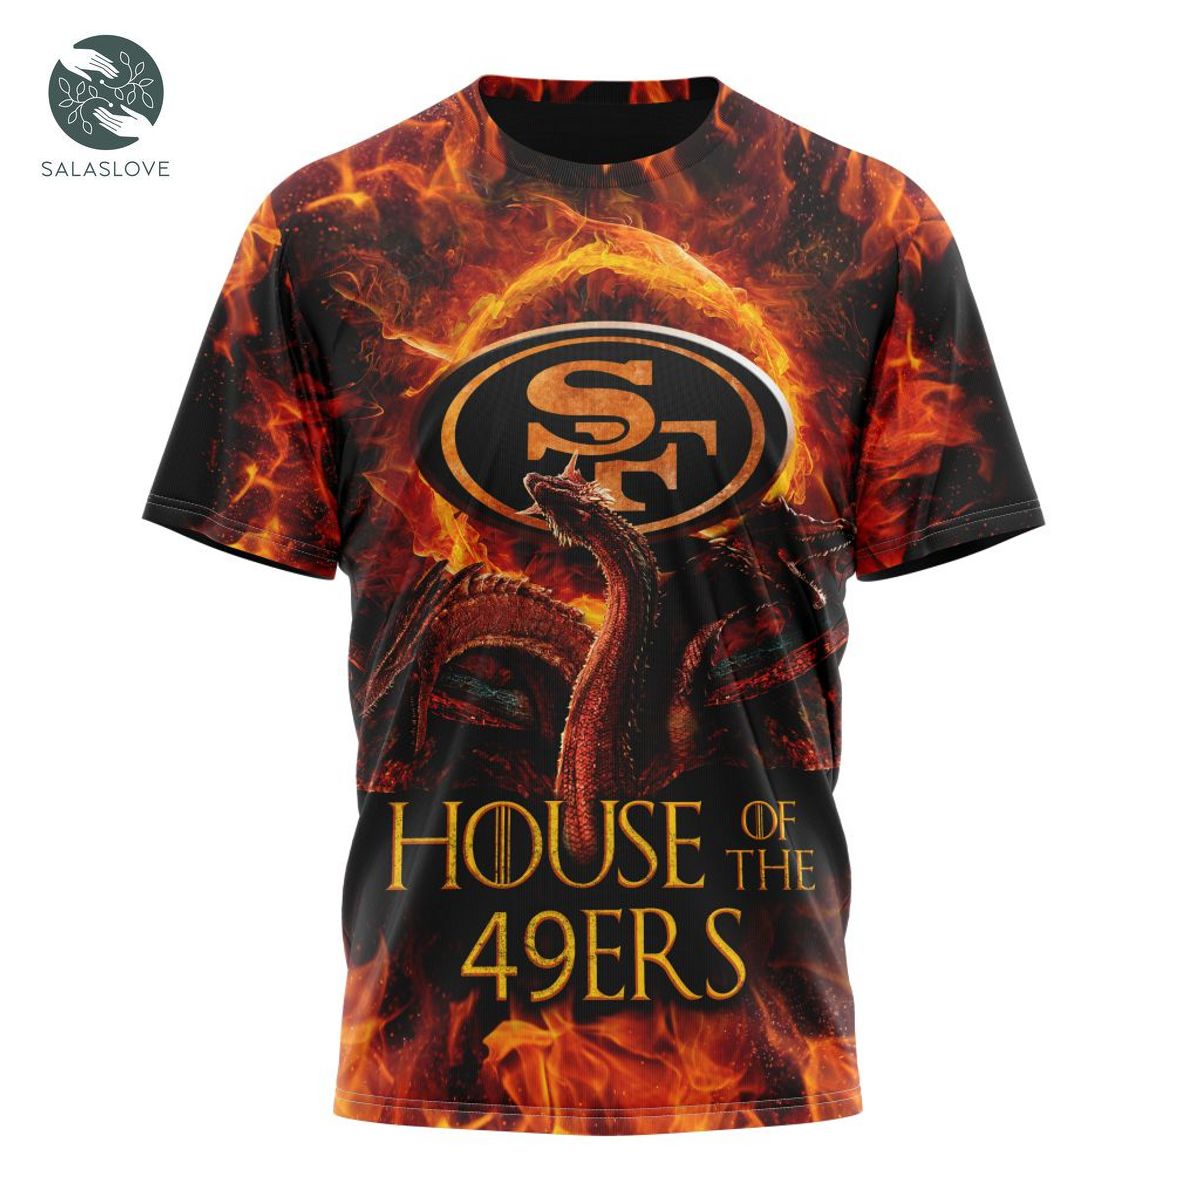 NFL San Francisco 49ers GAME OF THRONES – HOUSE OF THE 49ERS Shirt